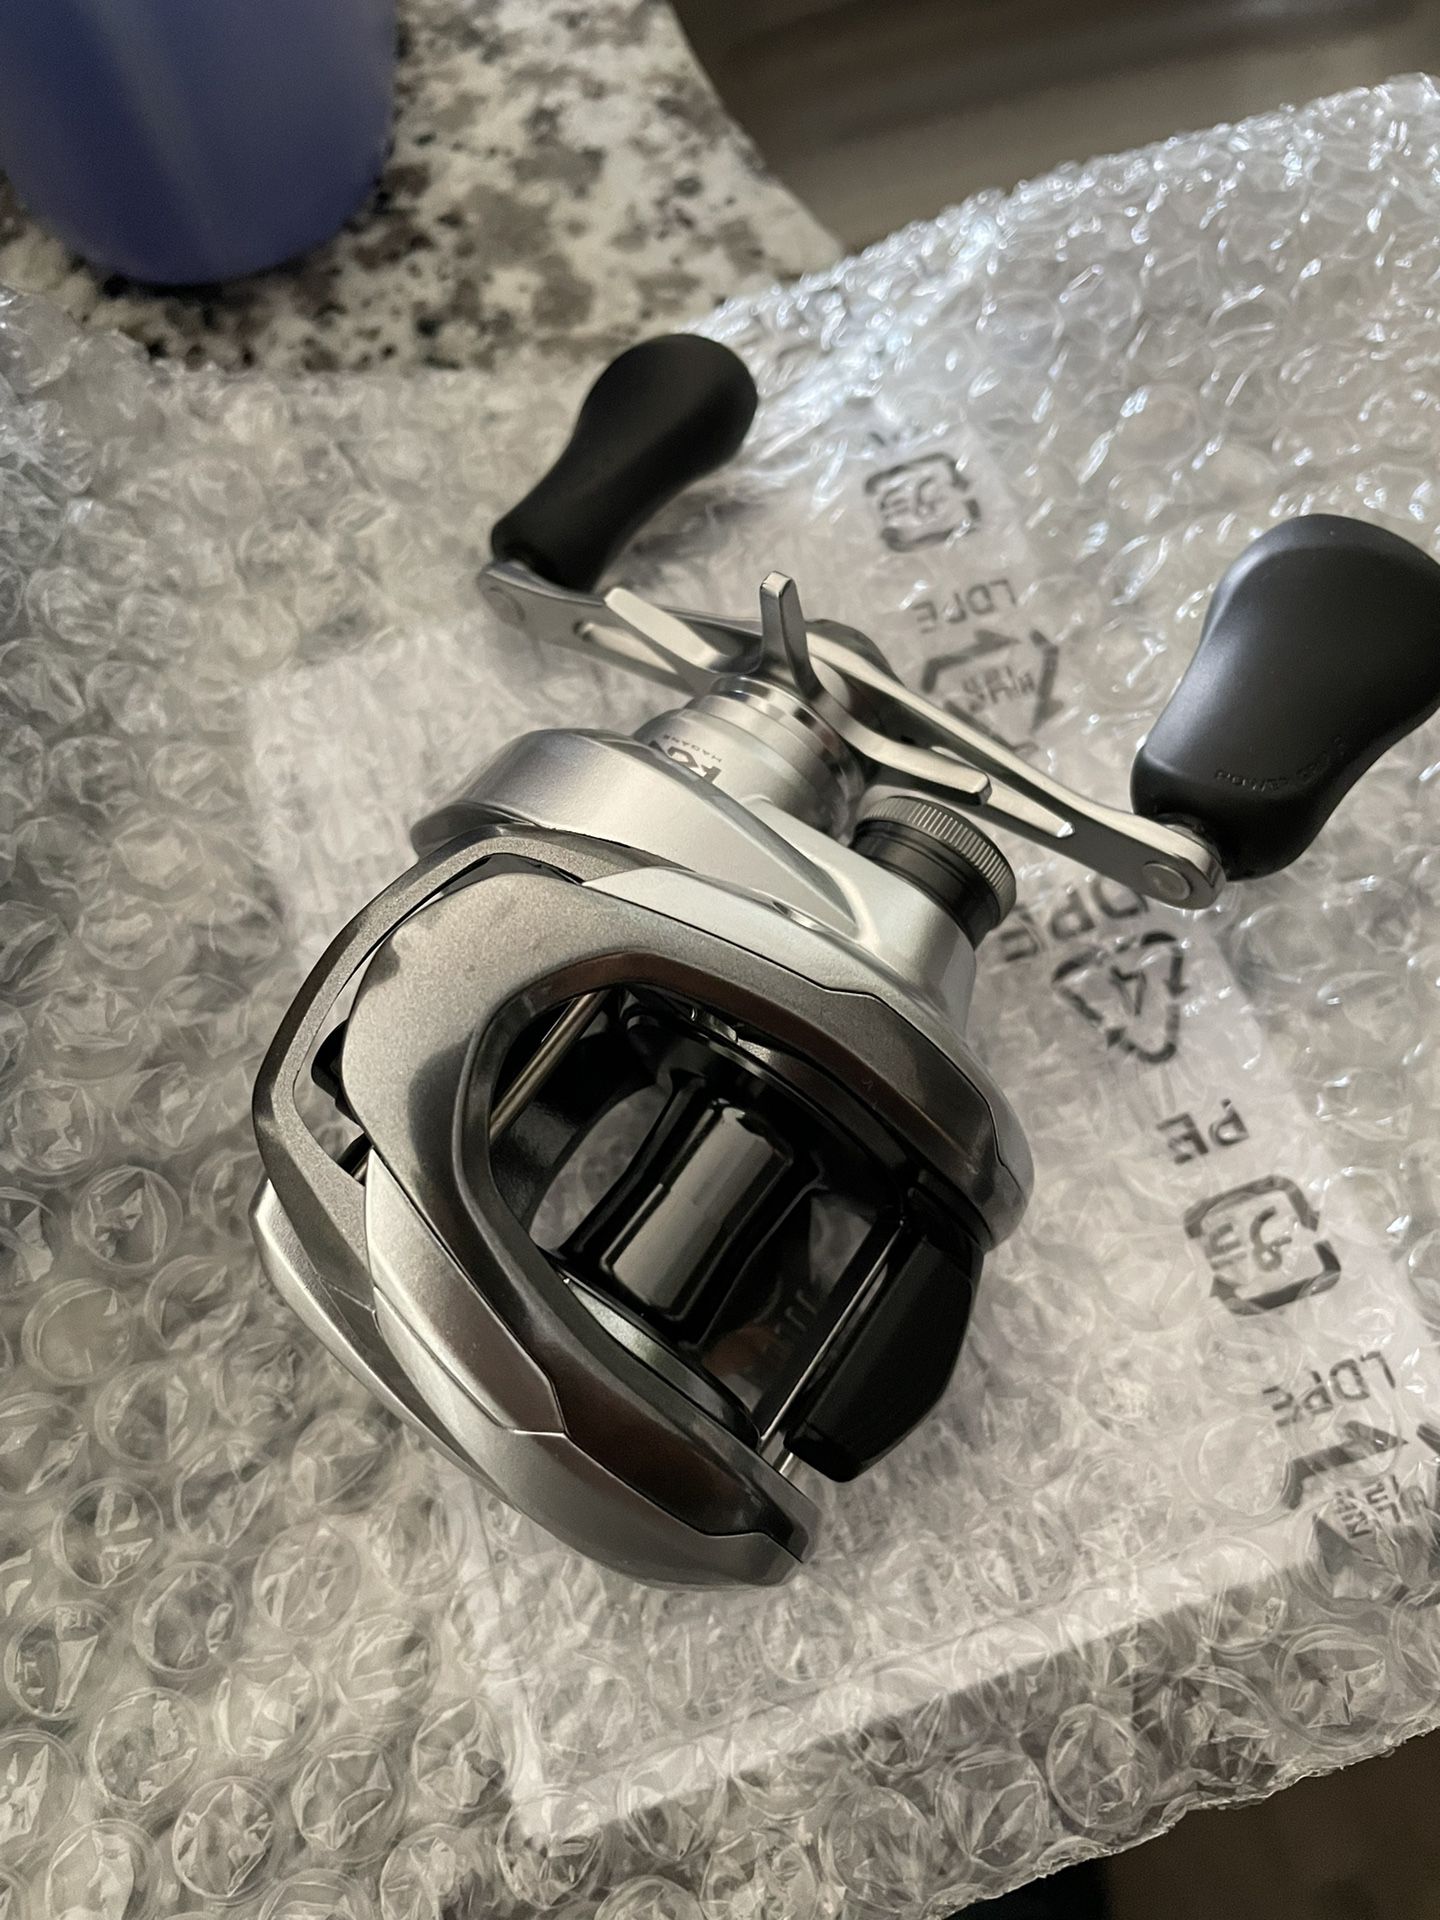 Shimano Tranx 150 Hg for Sale in Houston, TX - OfferUp